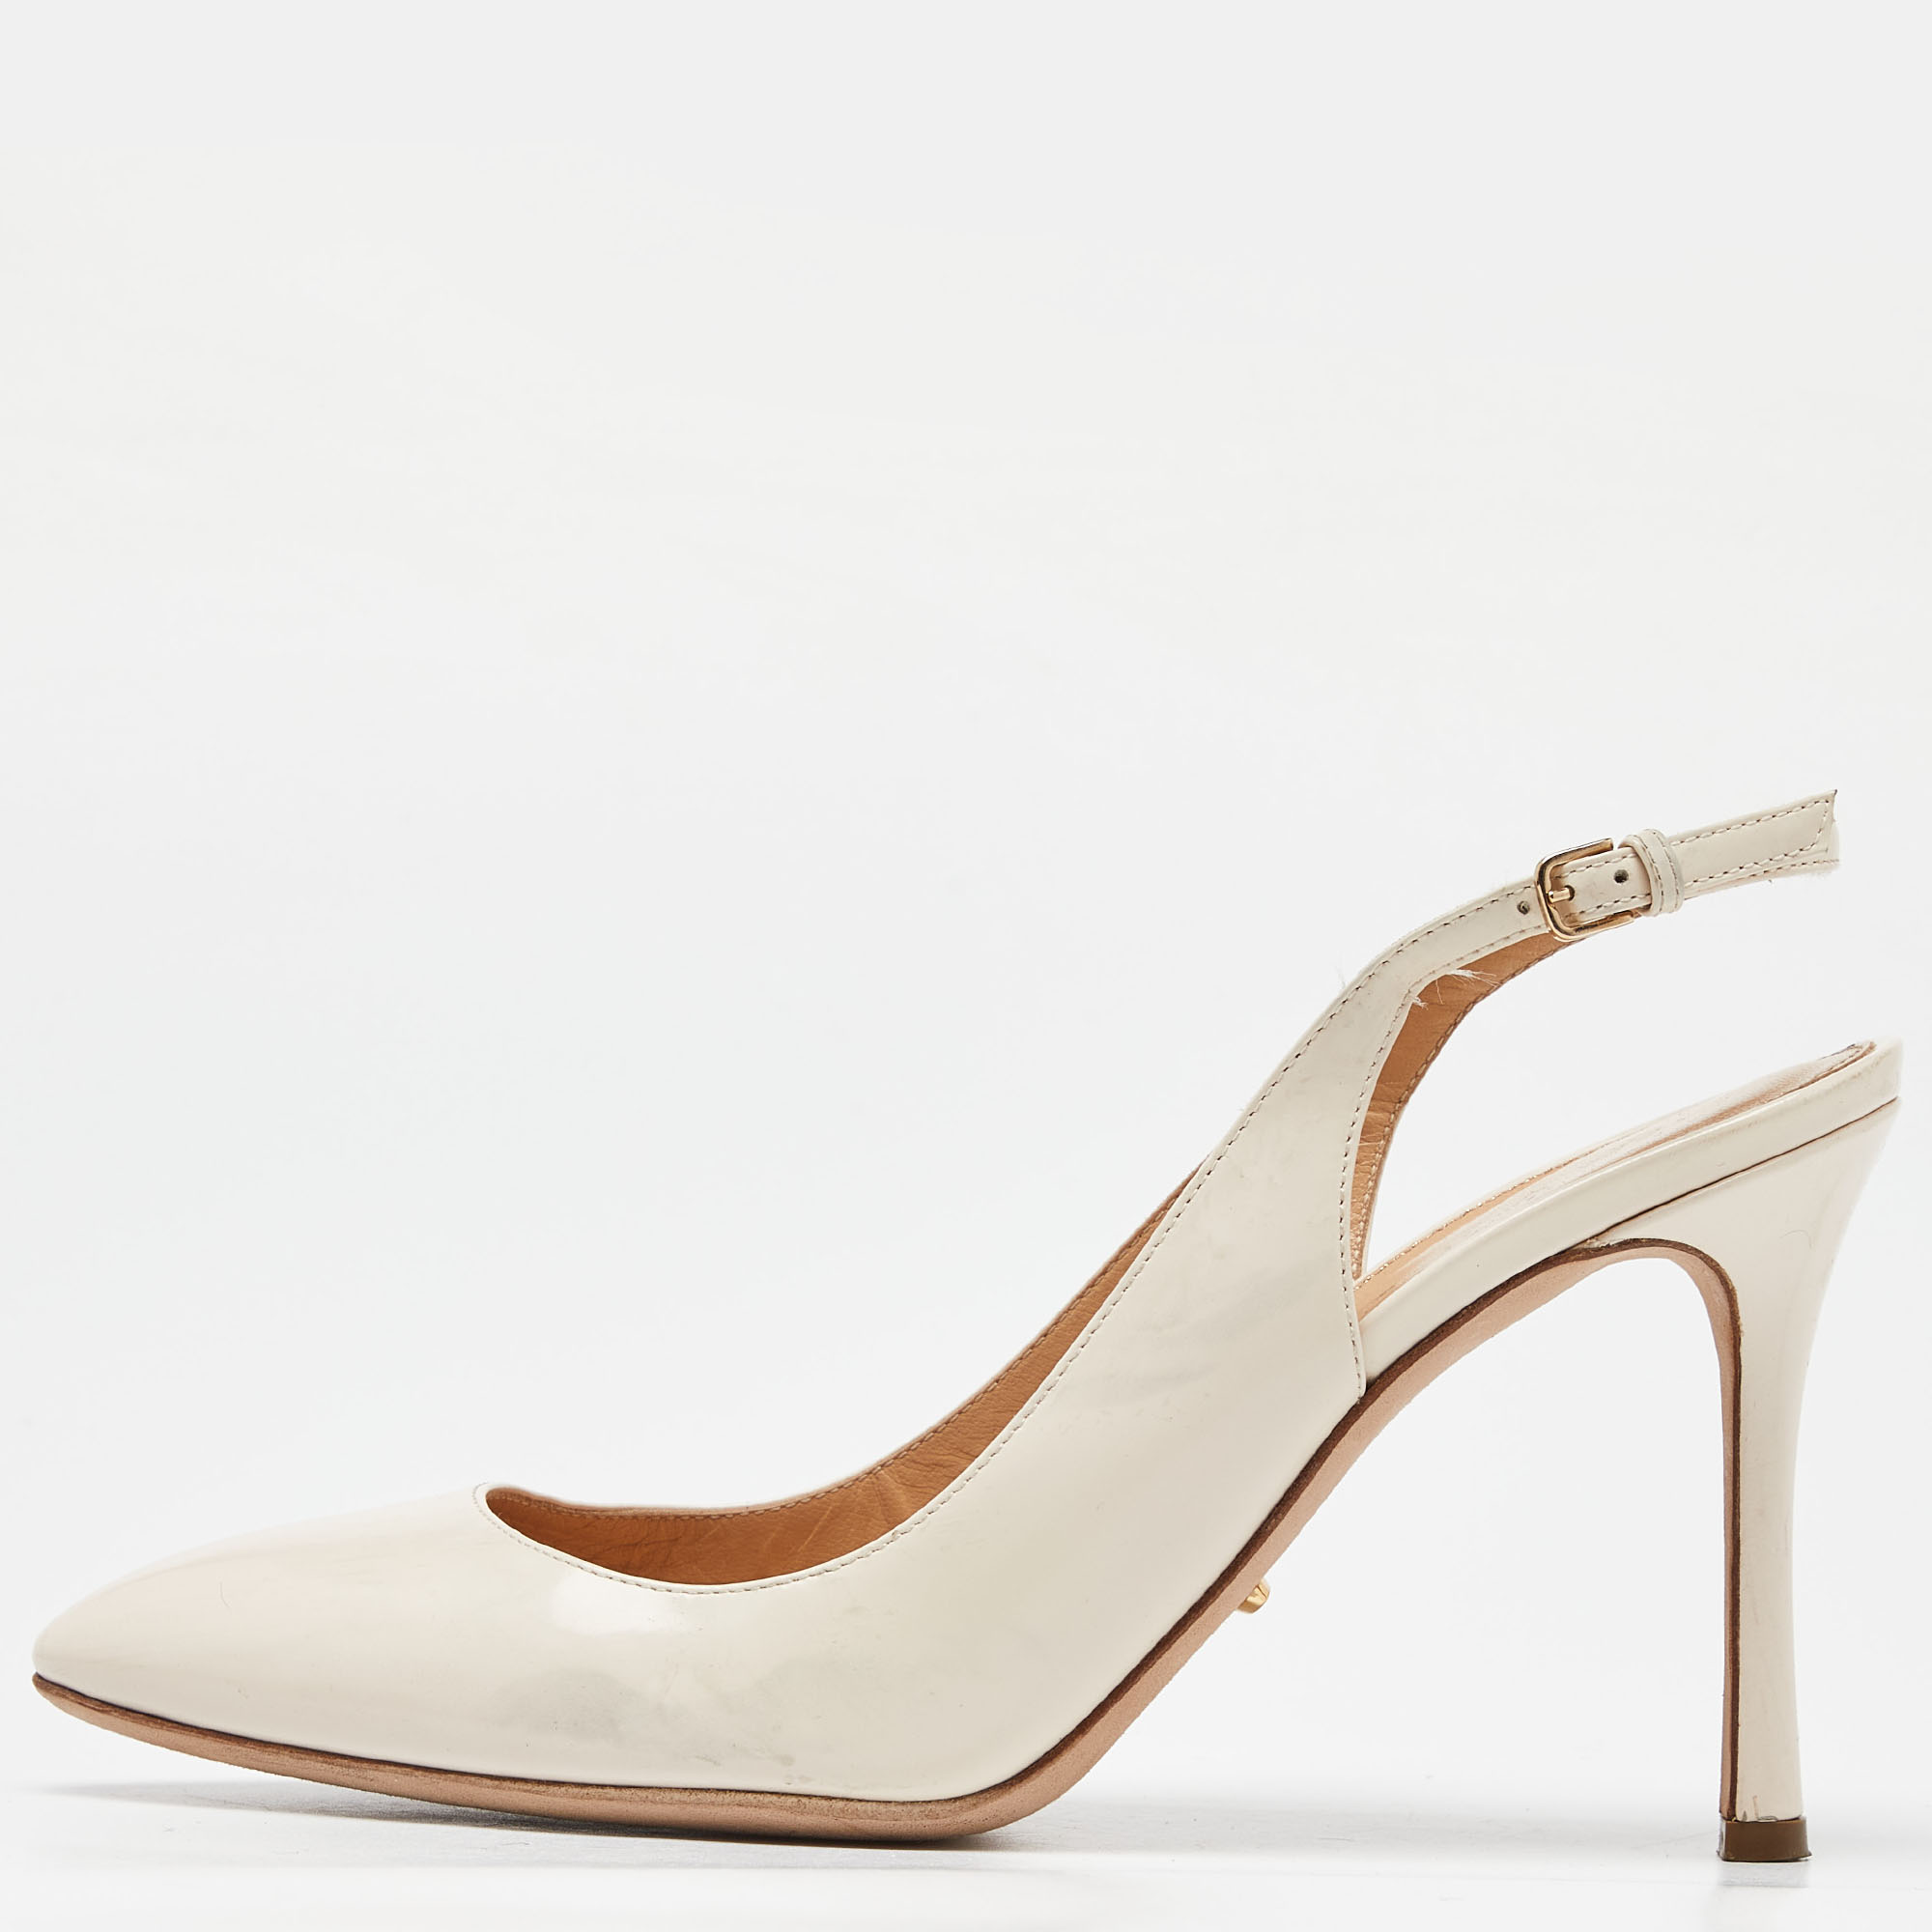 Sergio rossi beige leather slingback pumps size 38